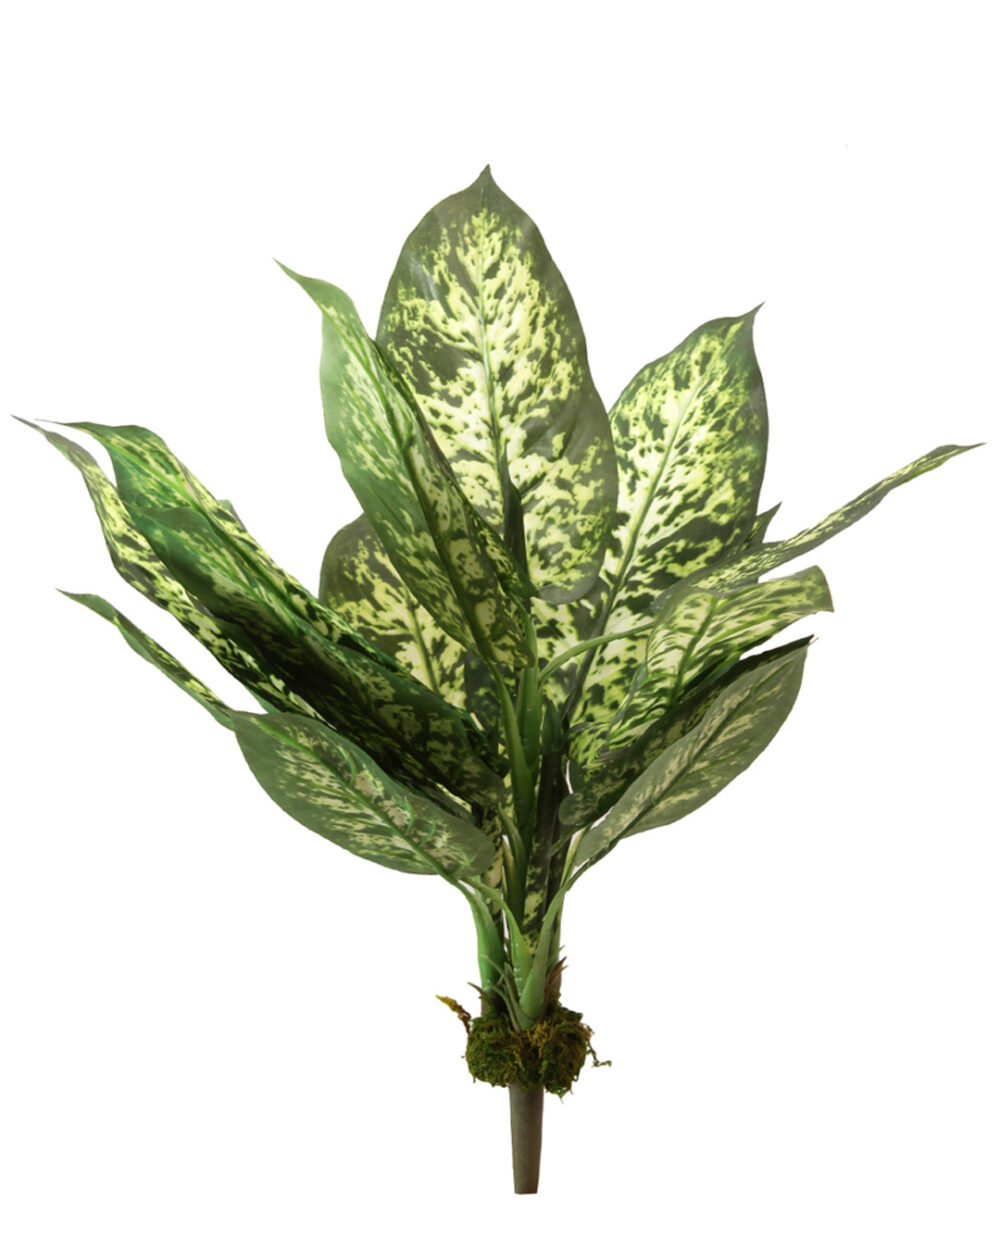 Buy Artificial Plants from Direct Importers and wholesalers